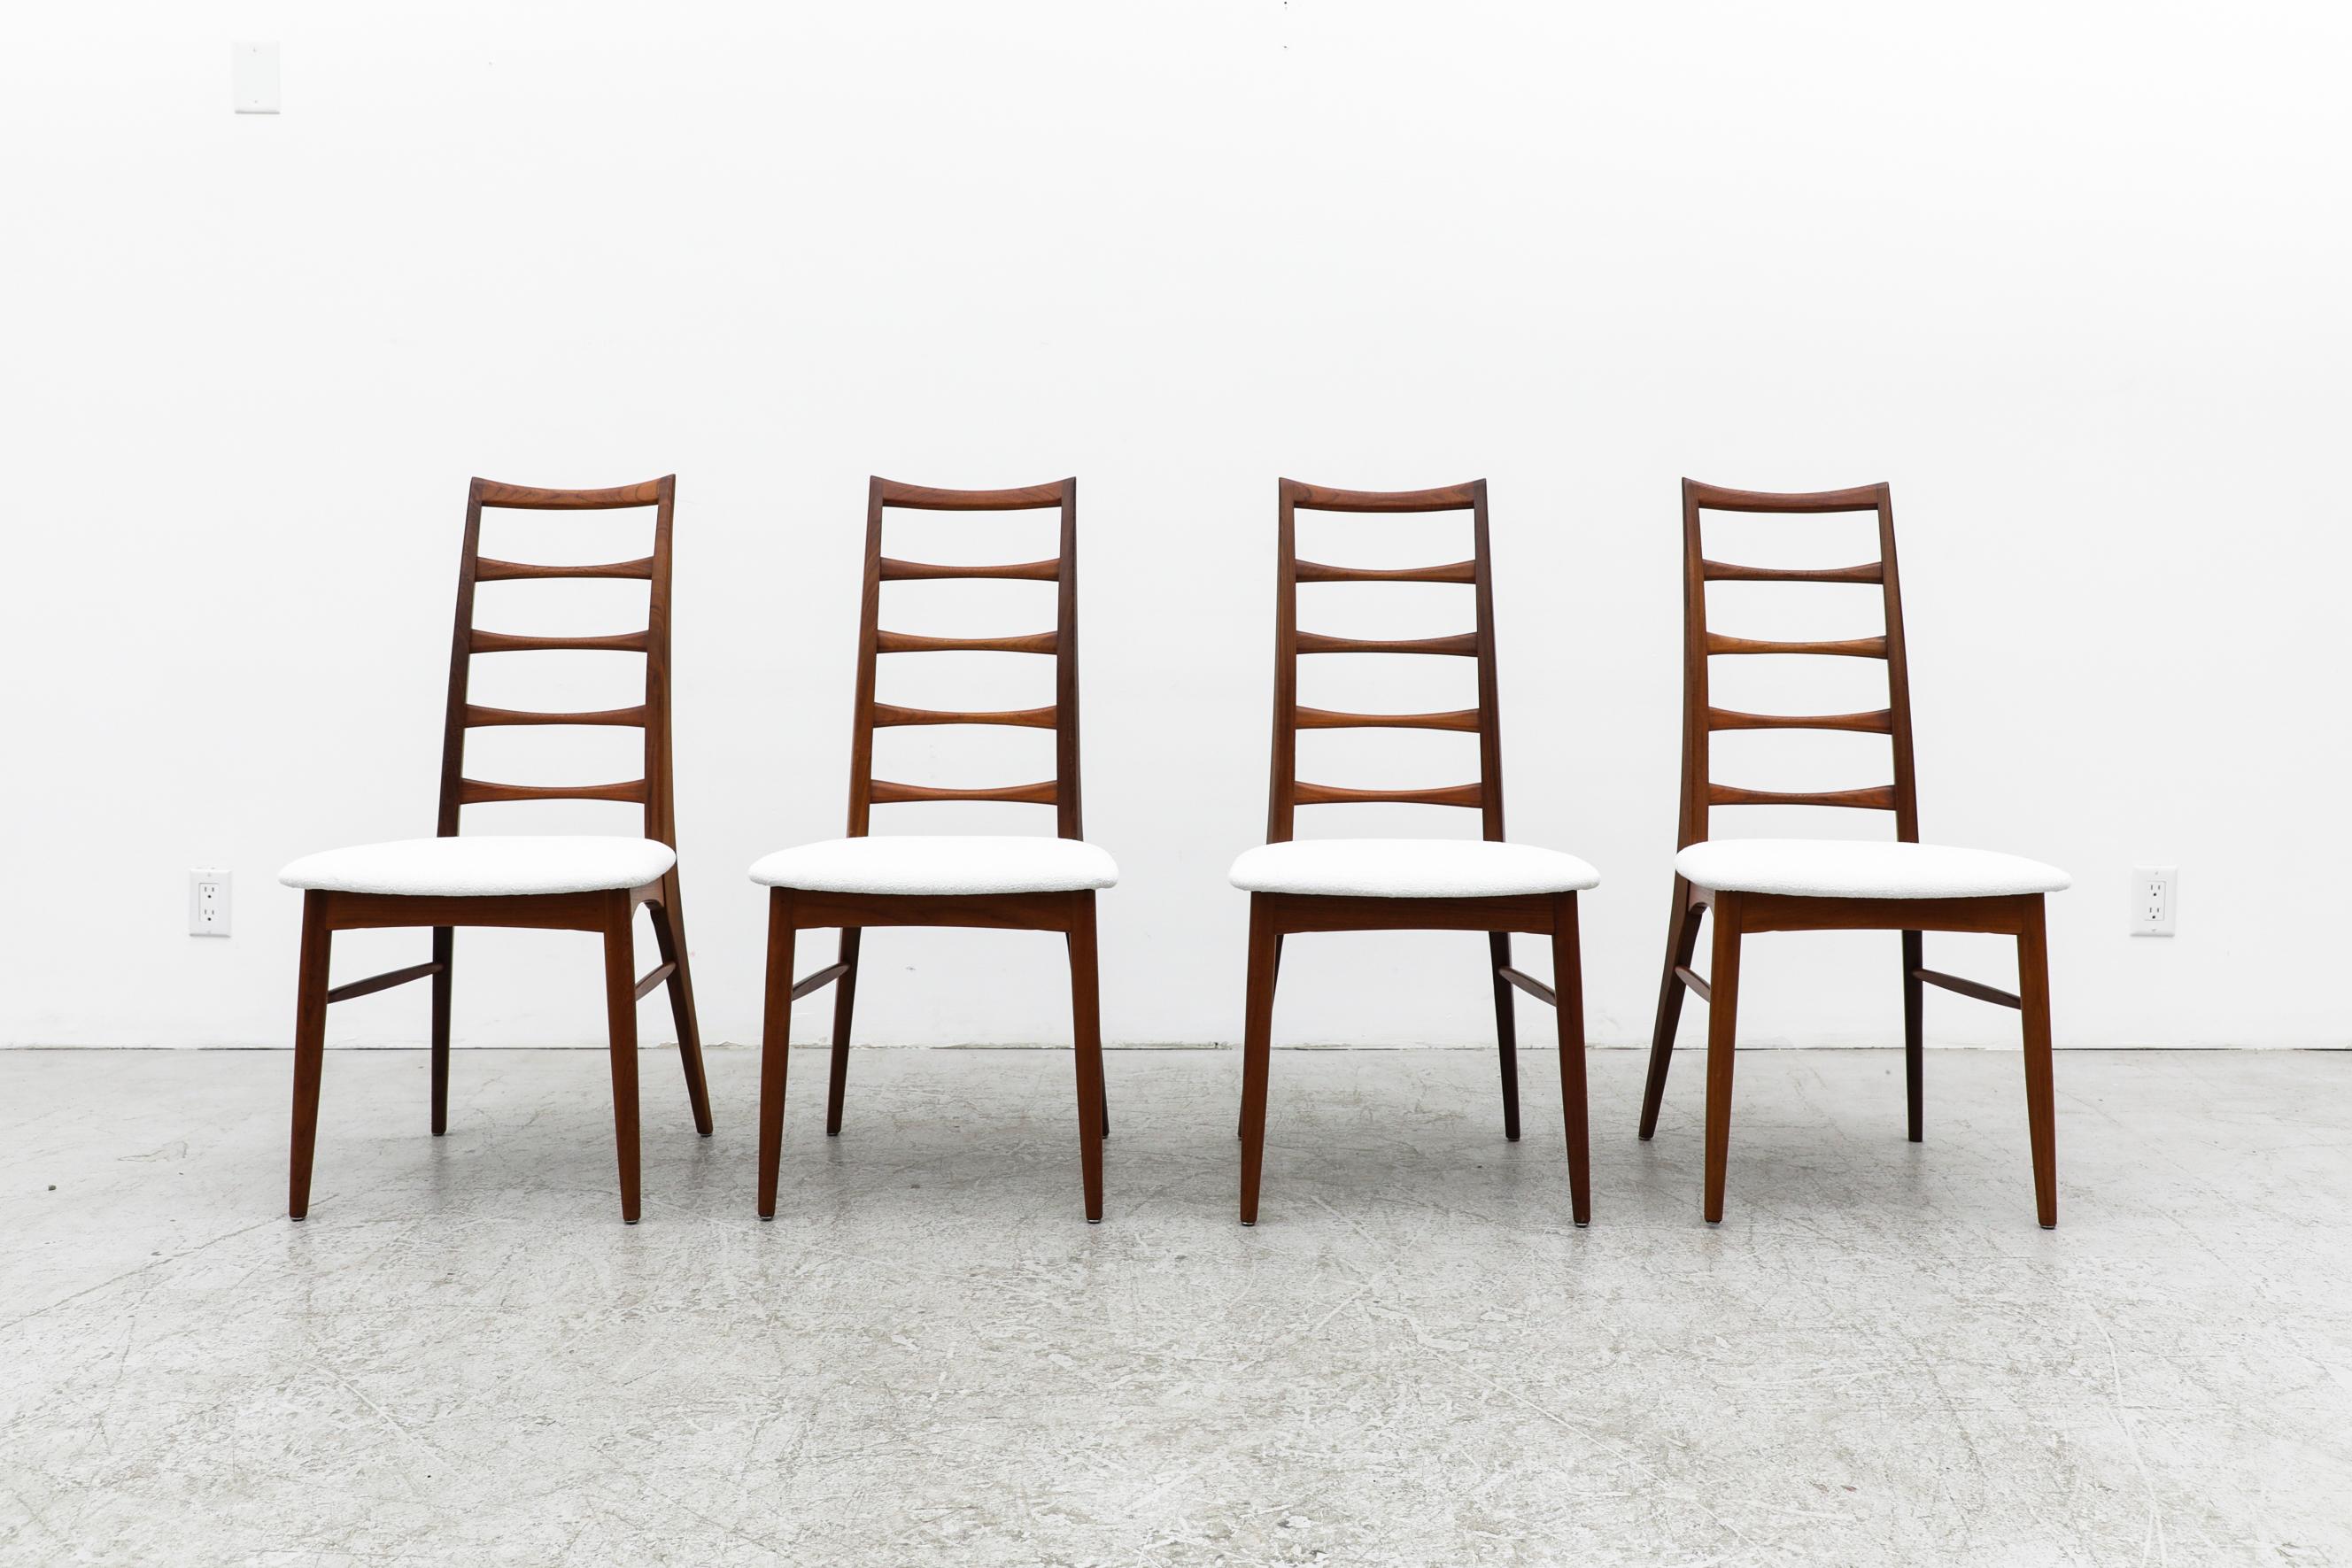 Set of 4 Danish tapered tall ladderback dining chairs with white upholstered seats. In original condition with minimal signs of wear, consistent with their age and use. Other ladderback dining chairs are available and listed separately.